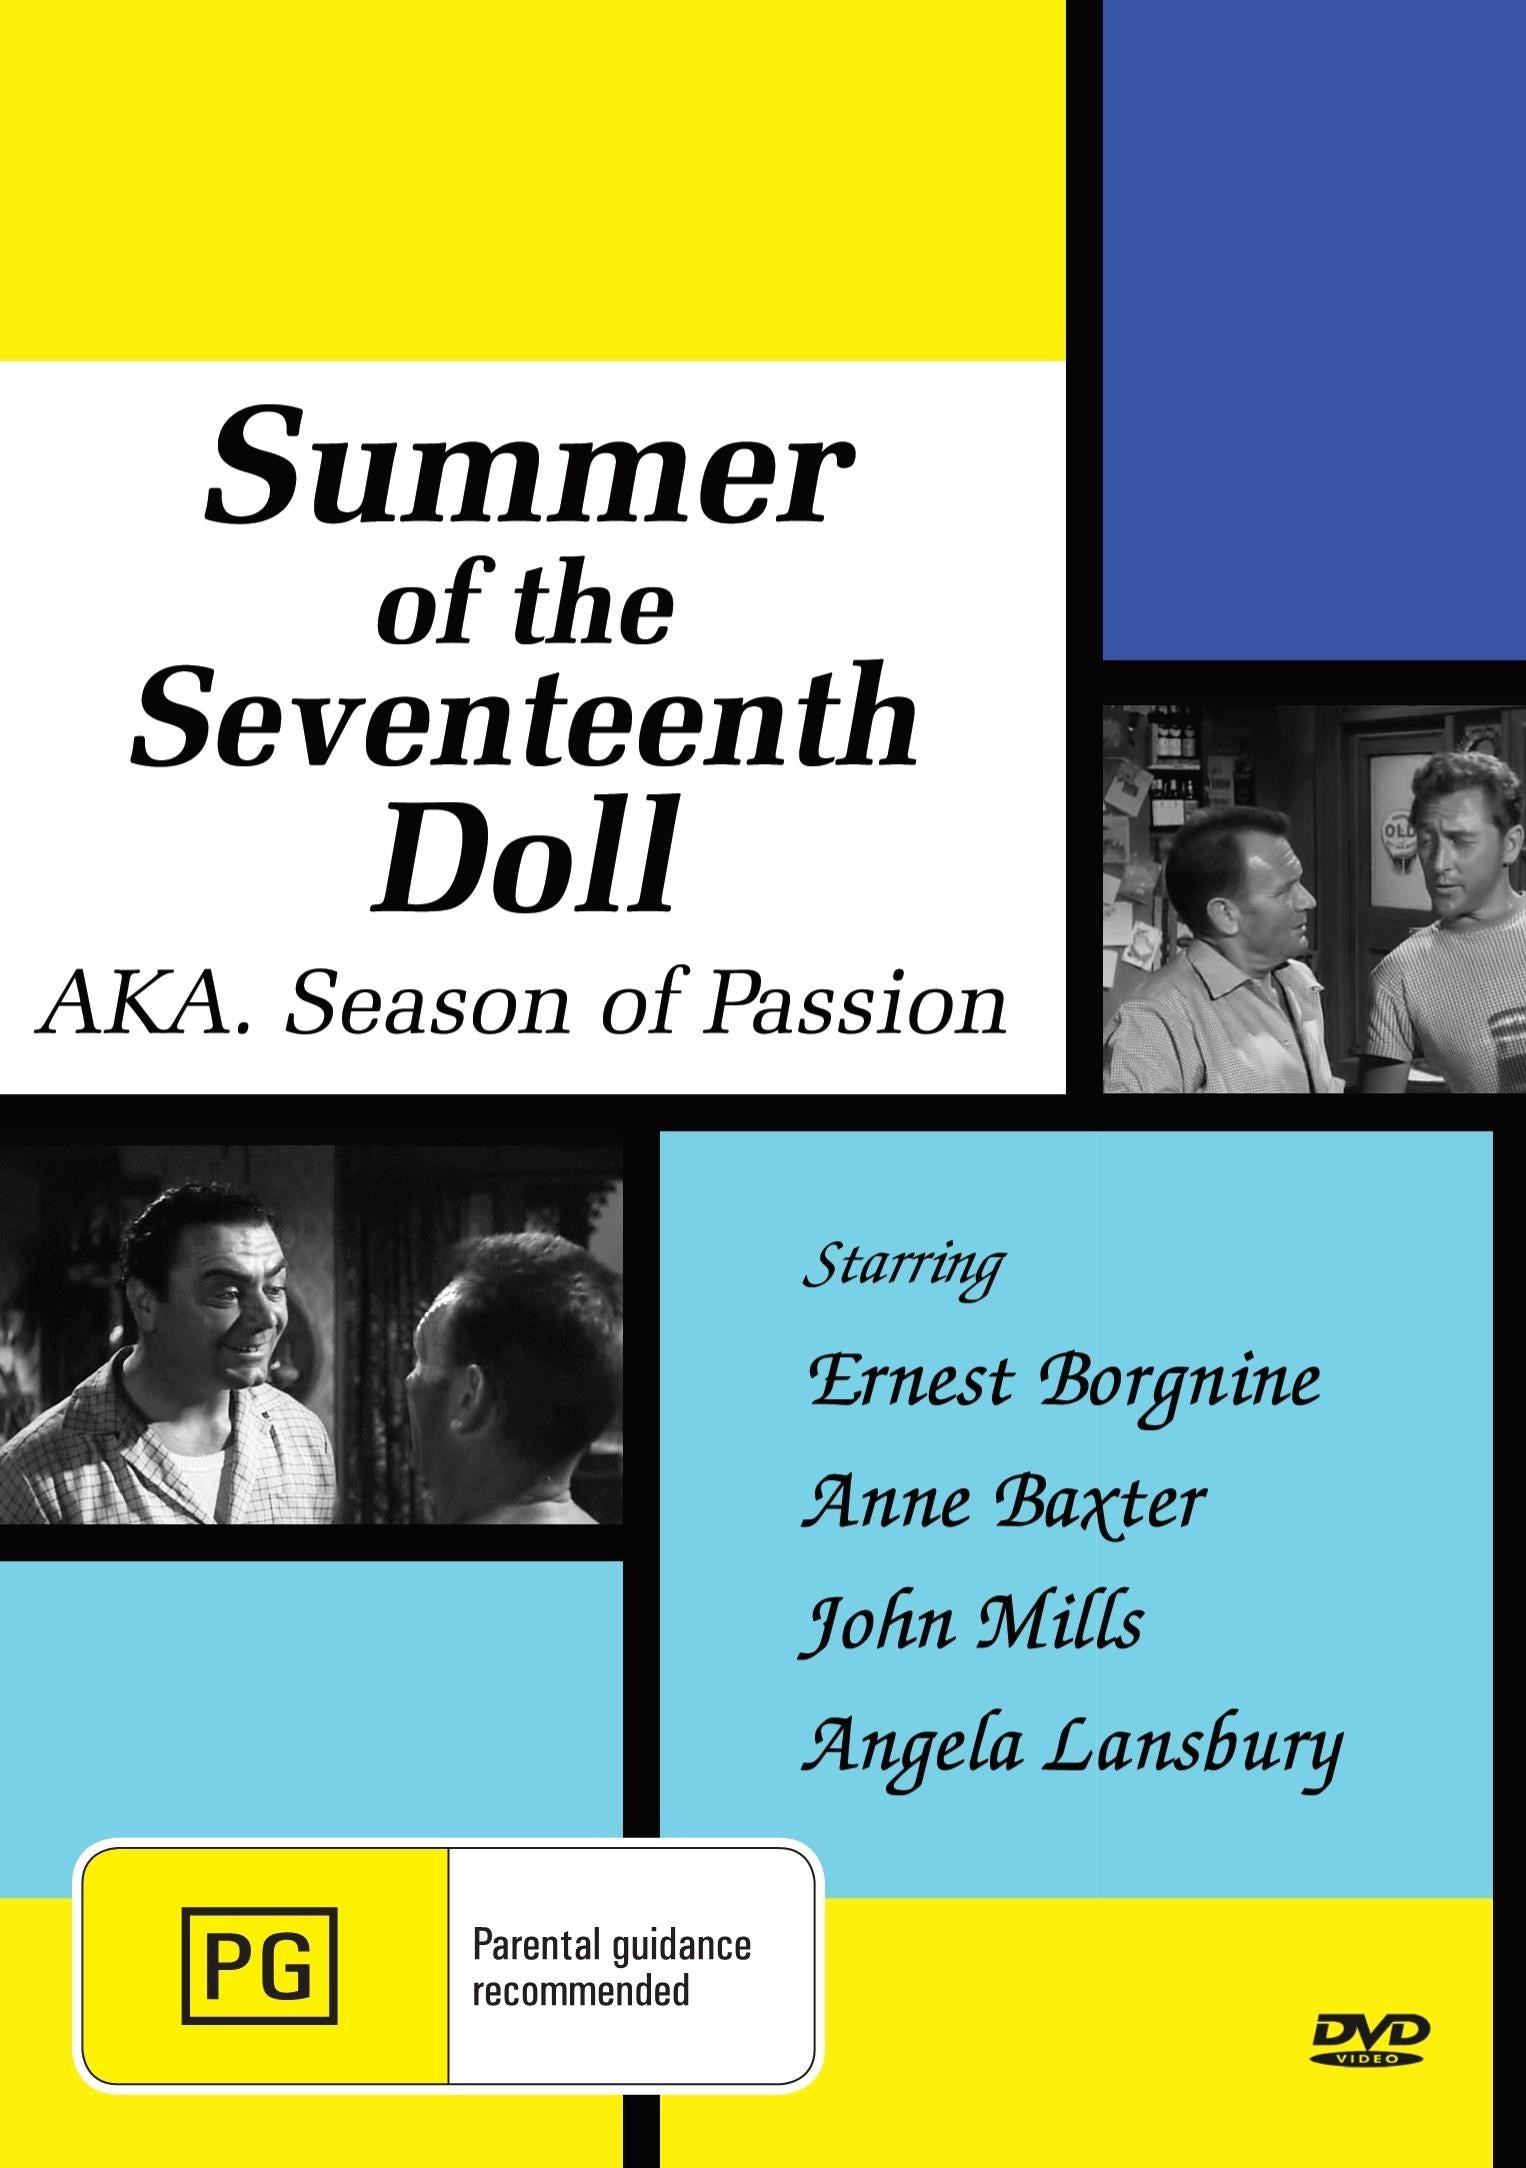 Summer of the Seventeenth Doll rareandcollectibledvds